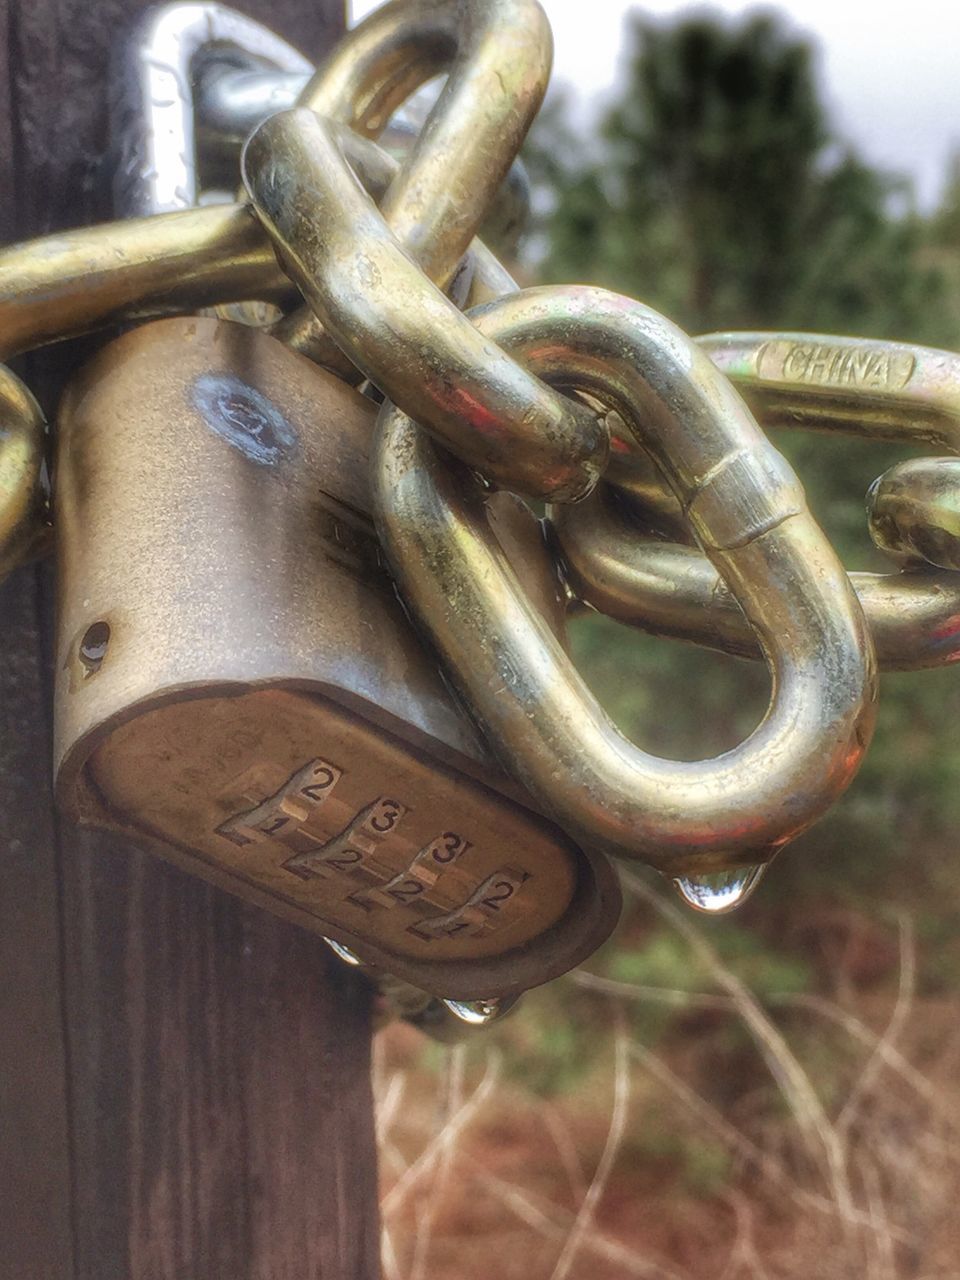 metal, close-up, metallic, rusty, focus on foreground, chain, padlock, lock, security, safety, protection, connection, old, strength, day, fence, handle, iron - metal, part of, communication